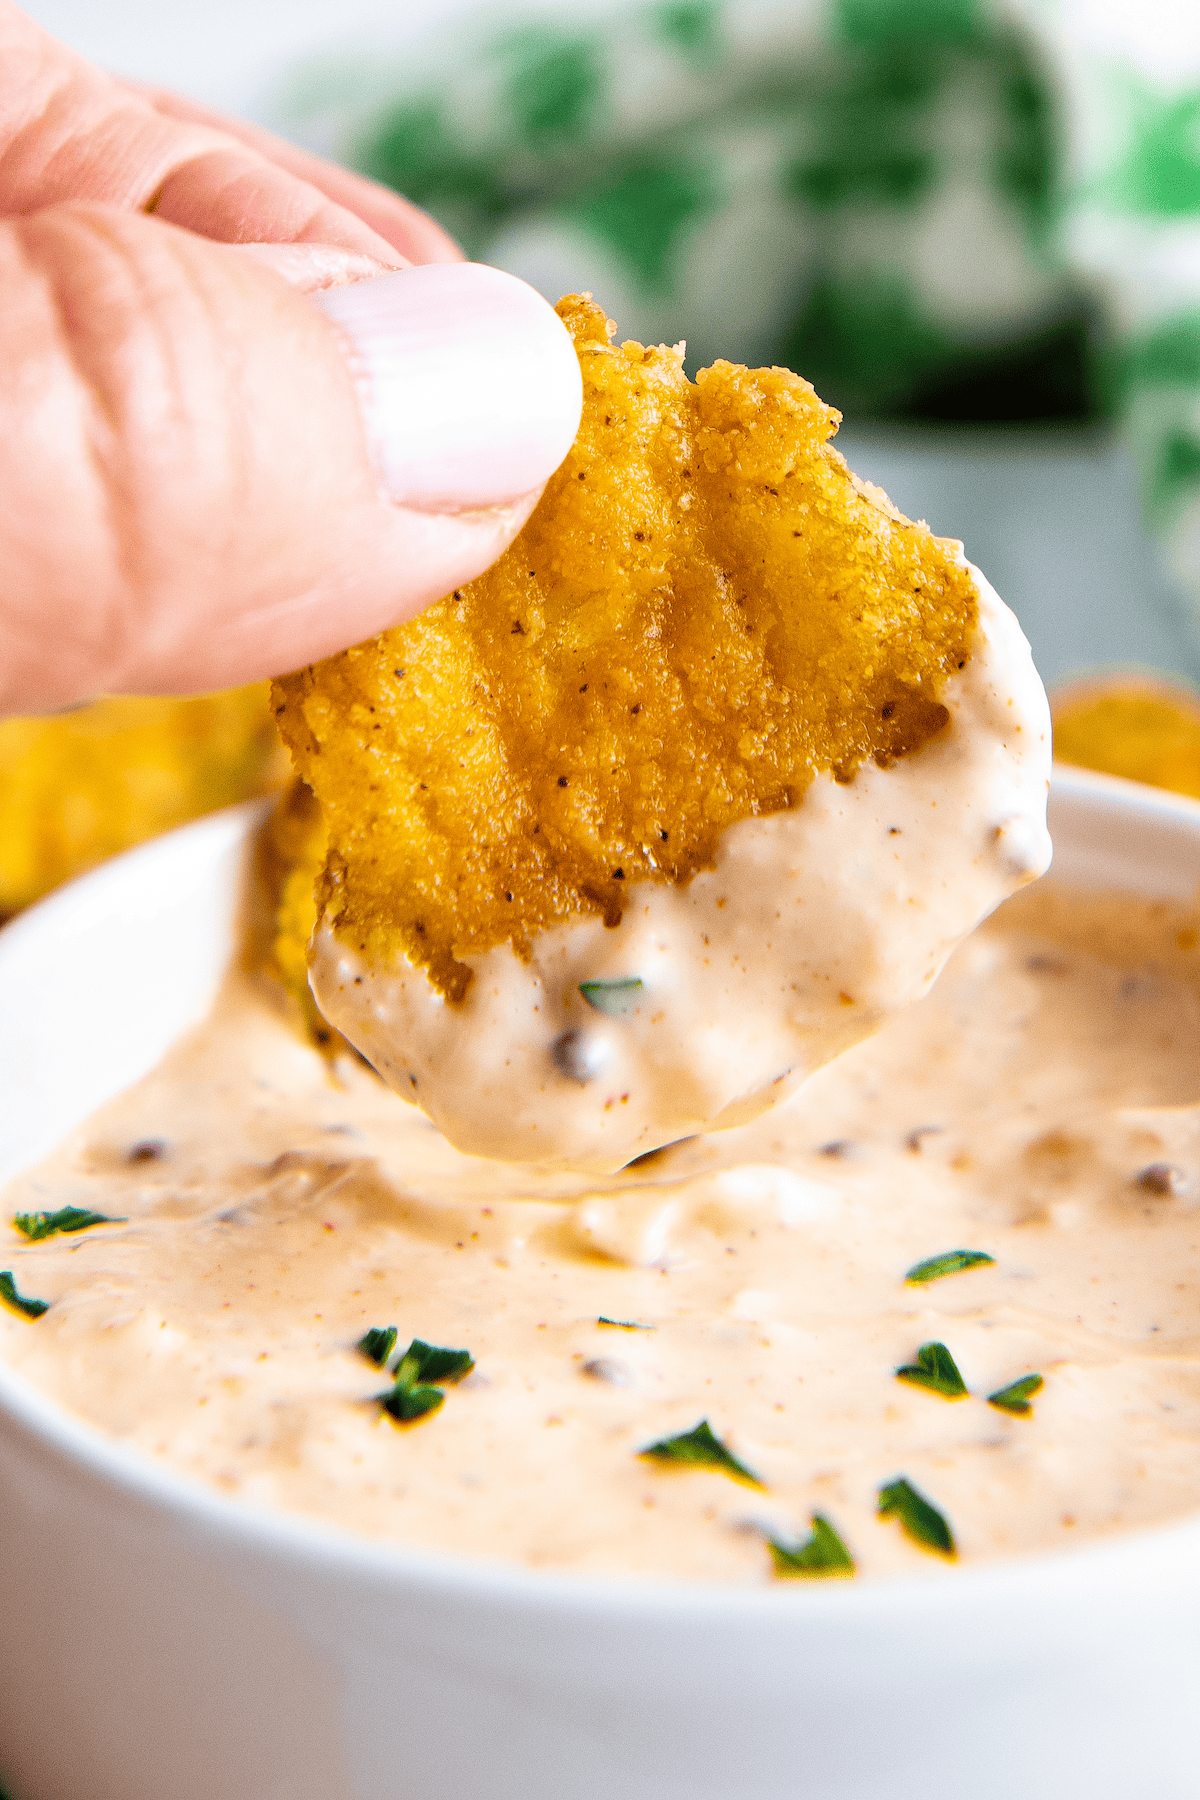 A hand dipping a fried pickle into sauce